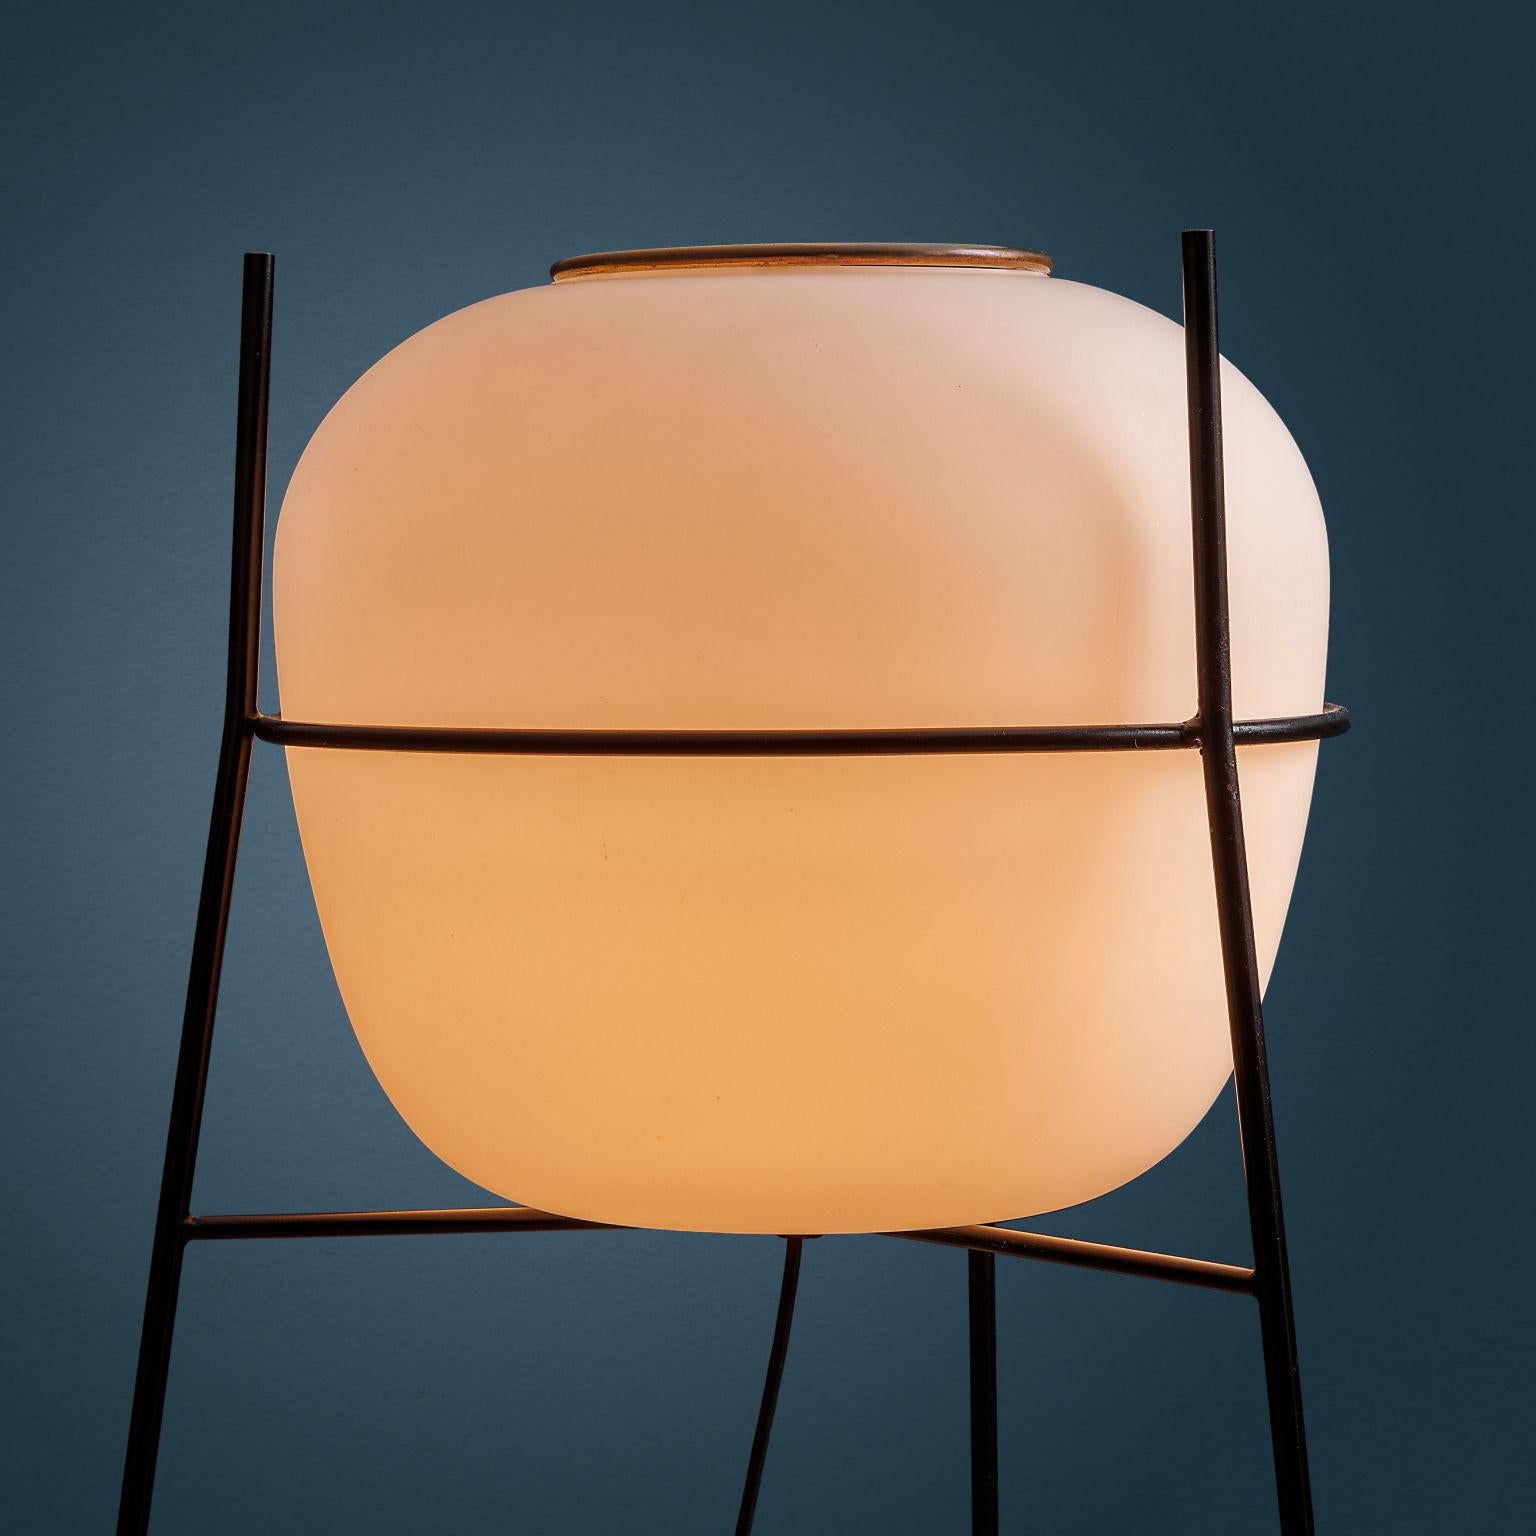 Stilnovo floor lamp 1960s In Excellent Condition For Sale In Milano, IT